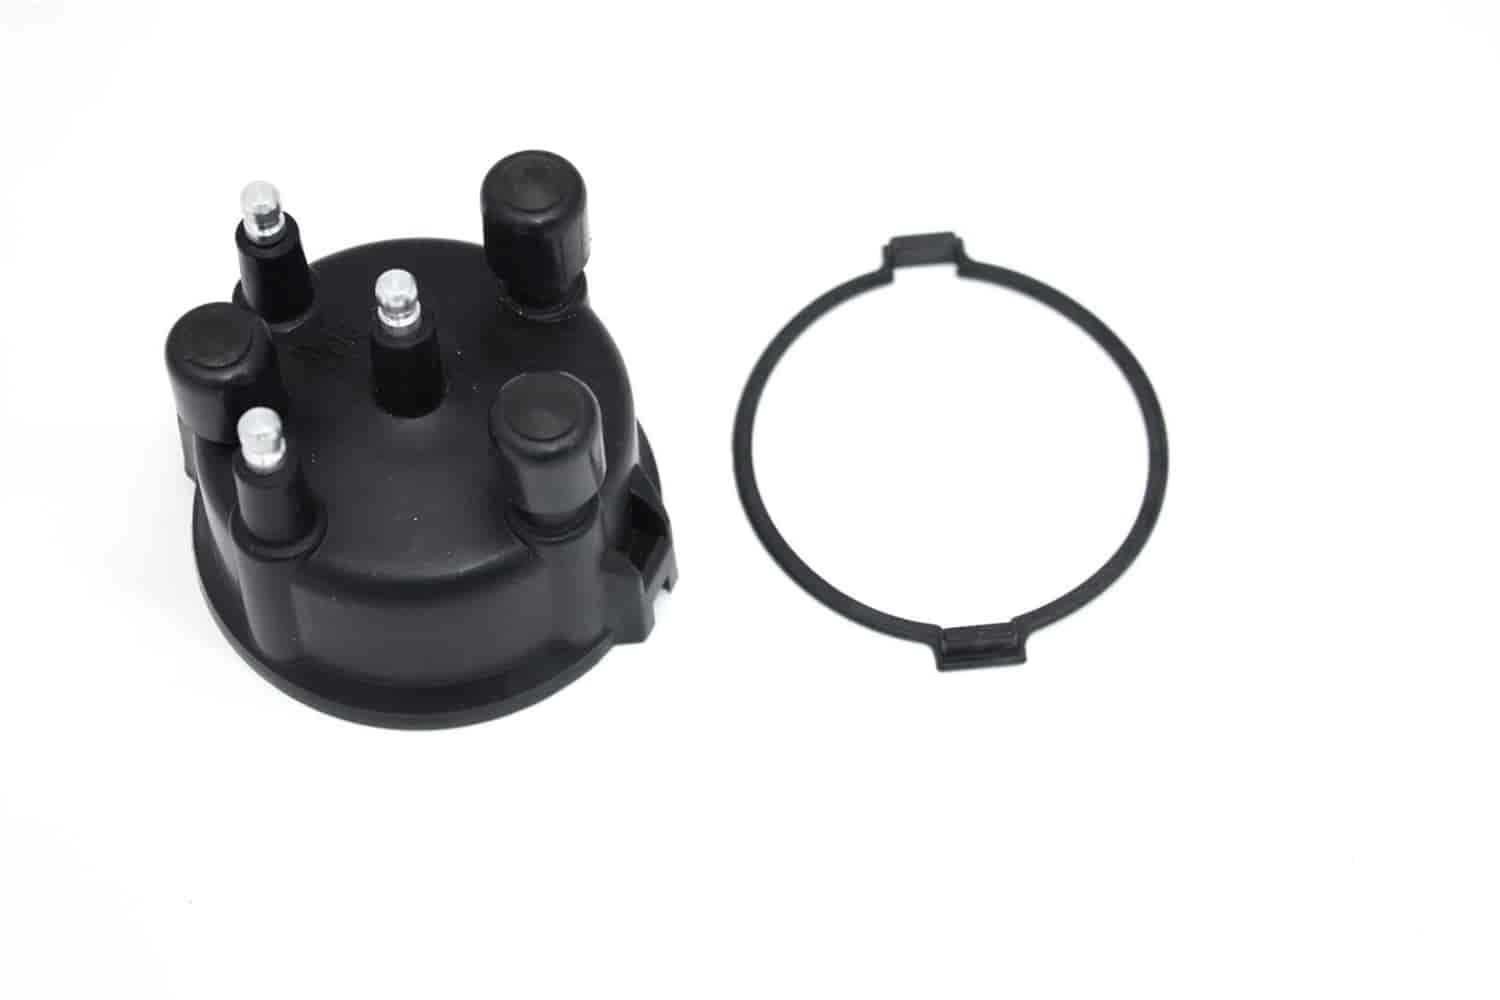 PerTronix 022-1201 Cap Kit for D23-02A for PerTronix